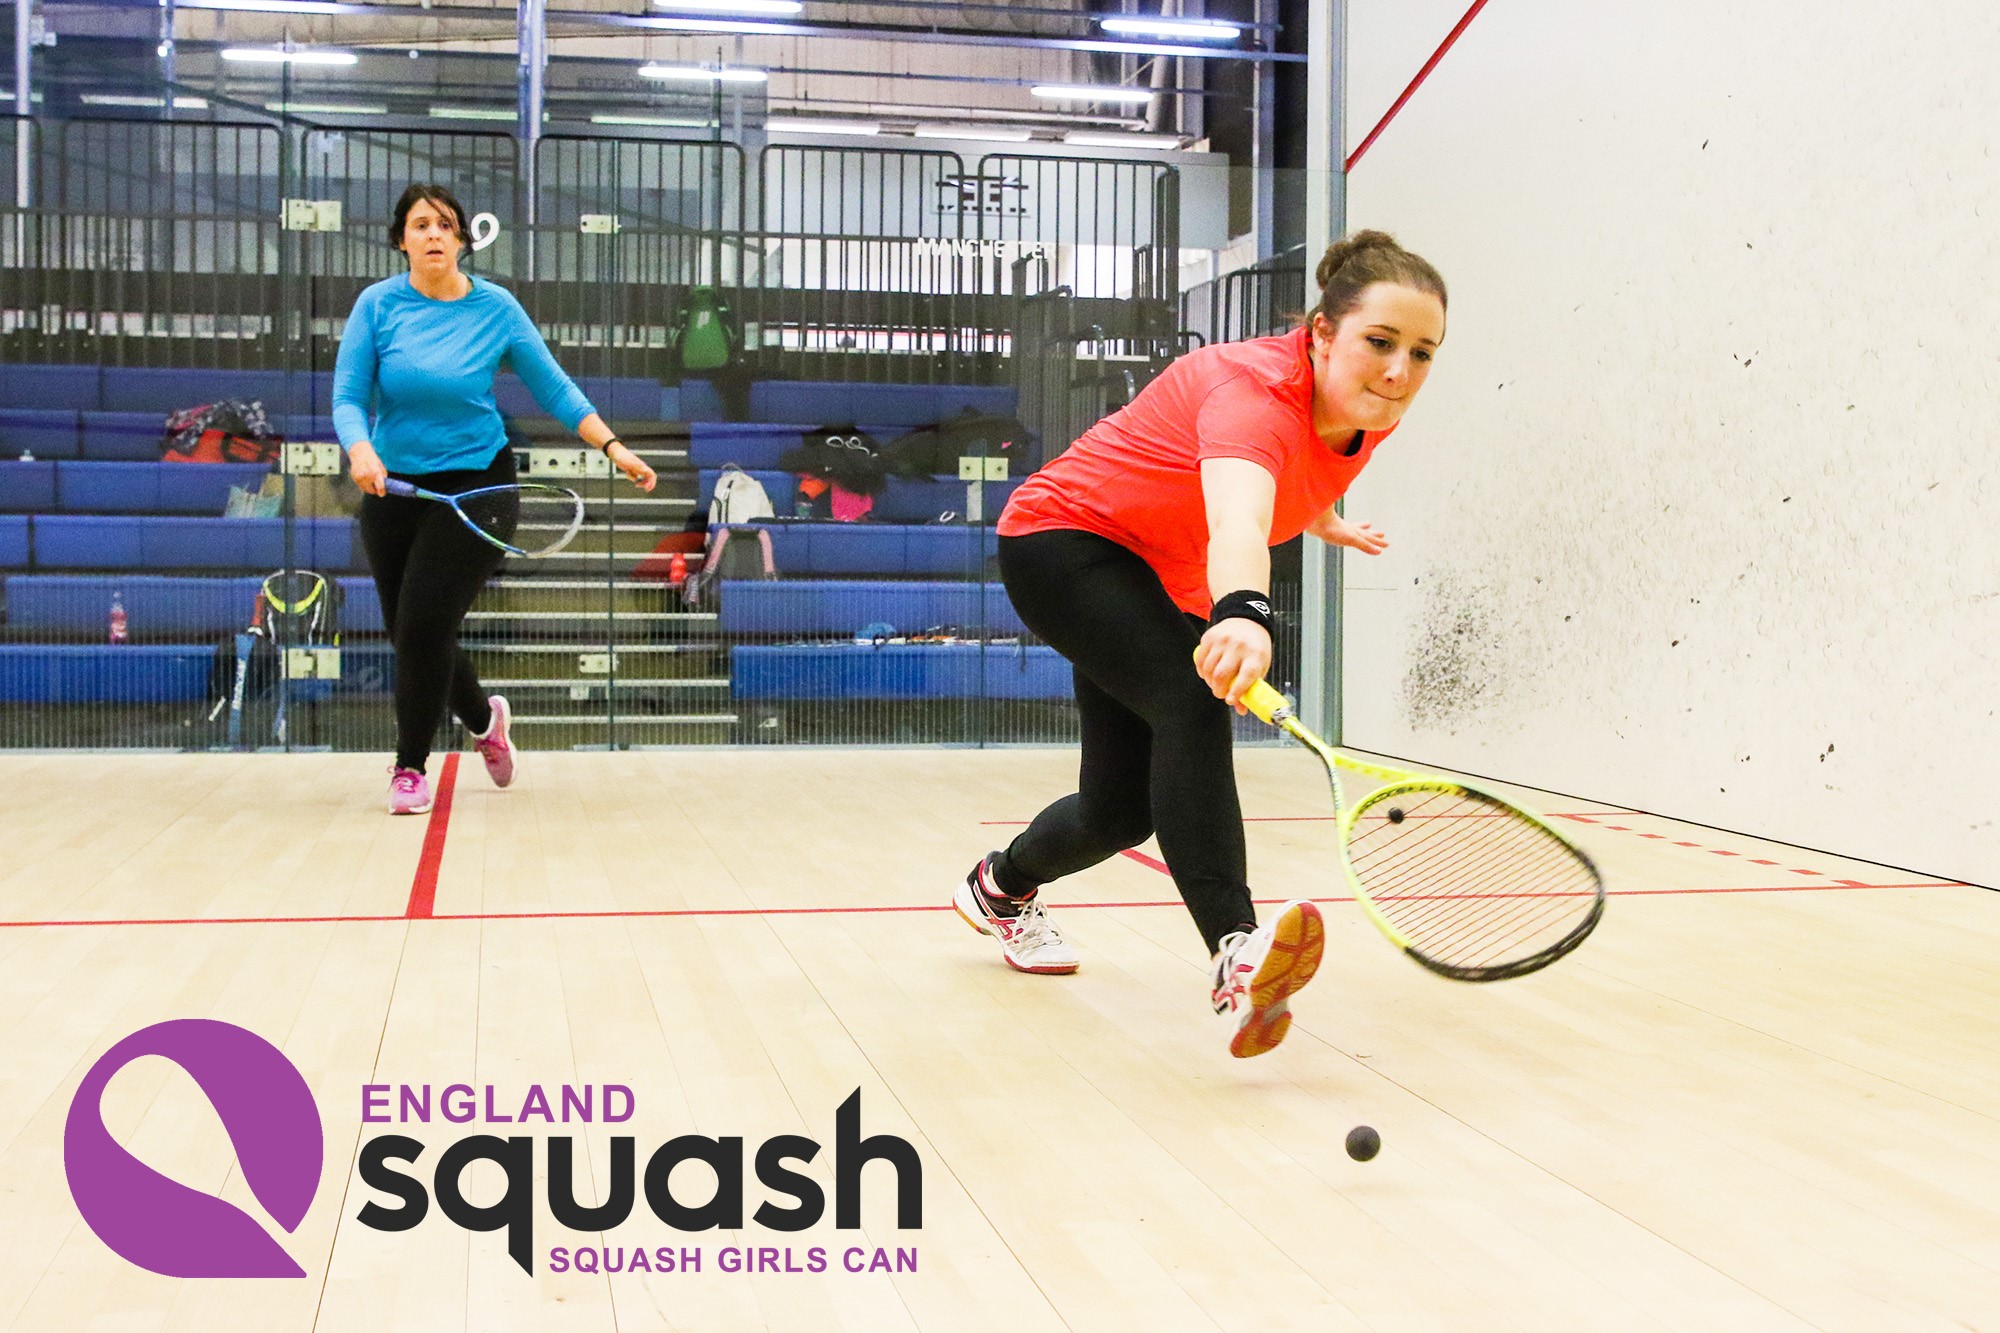 England Squash launches new campaign for women | News